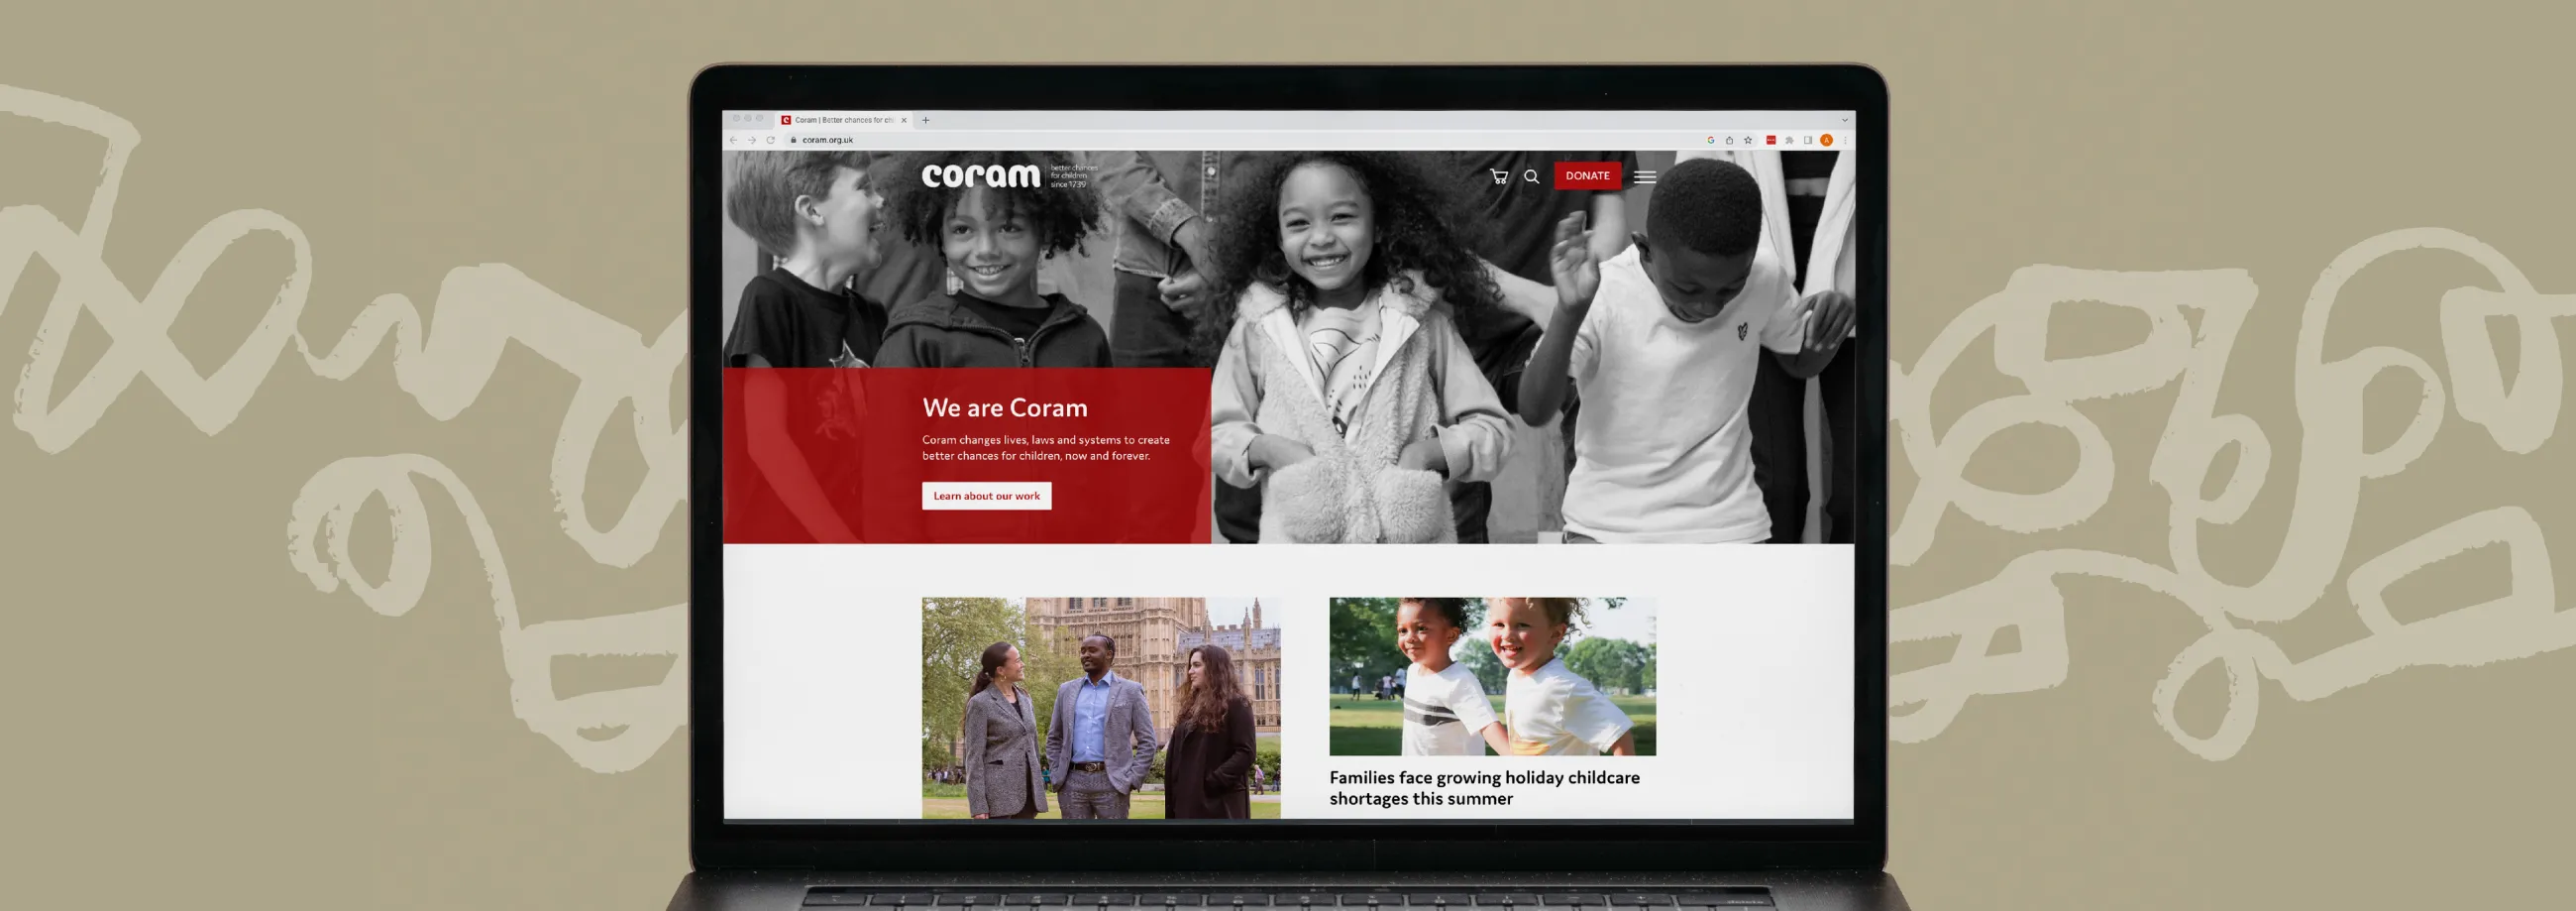 Coram website shown on a laptop